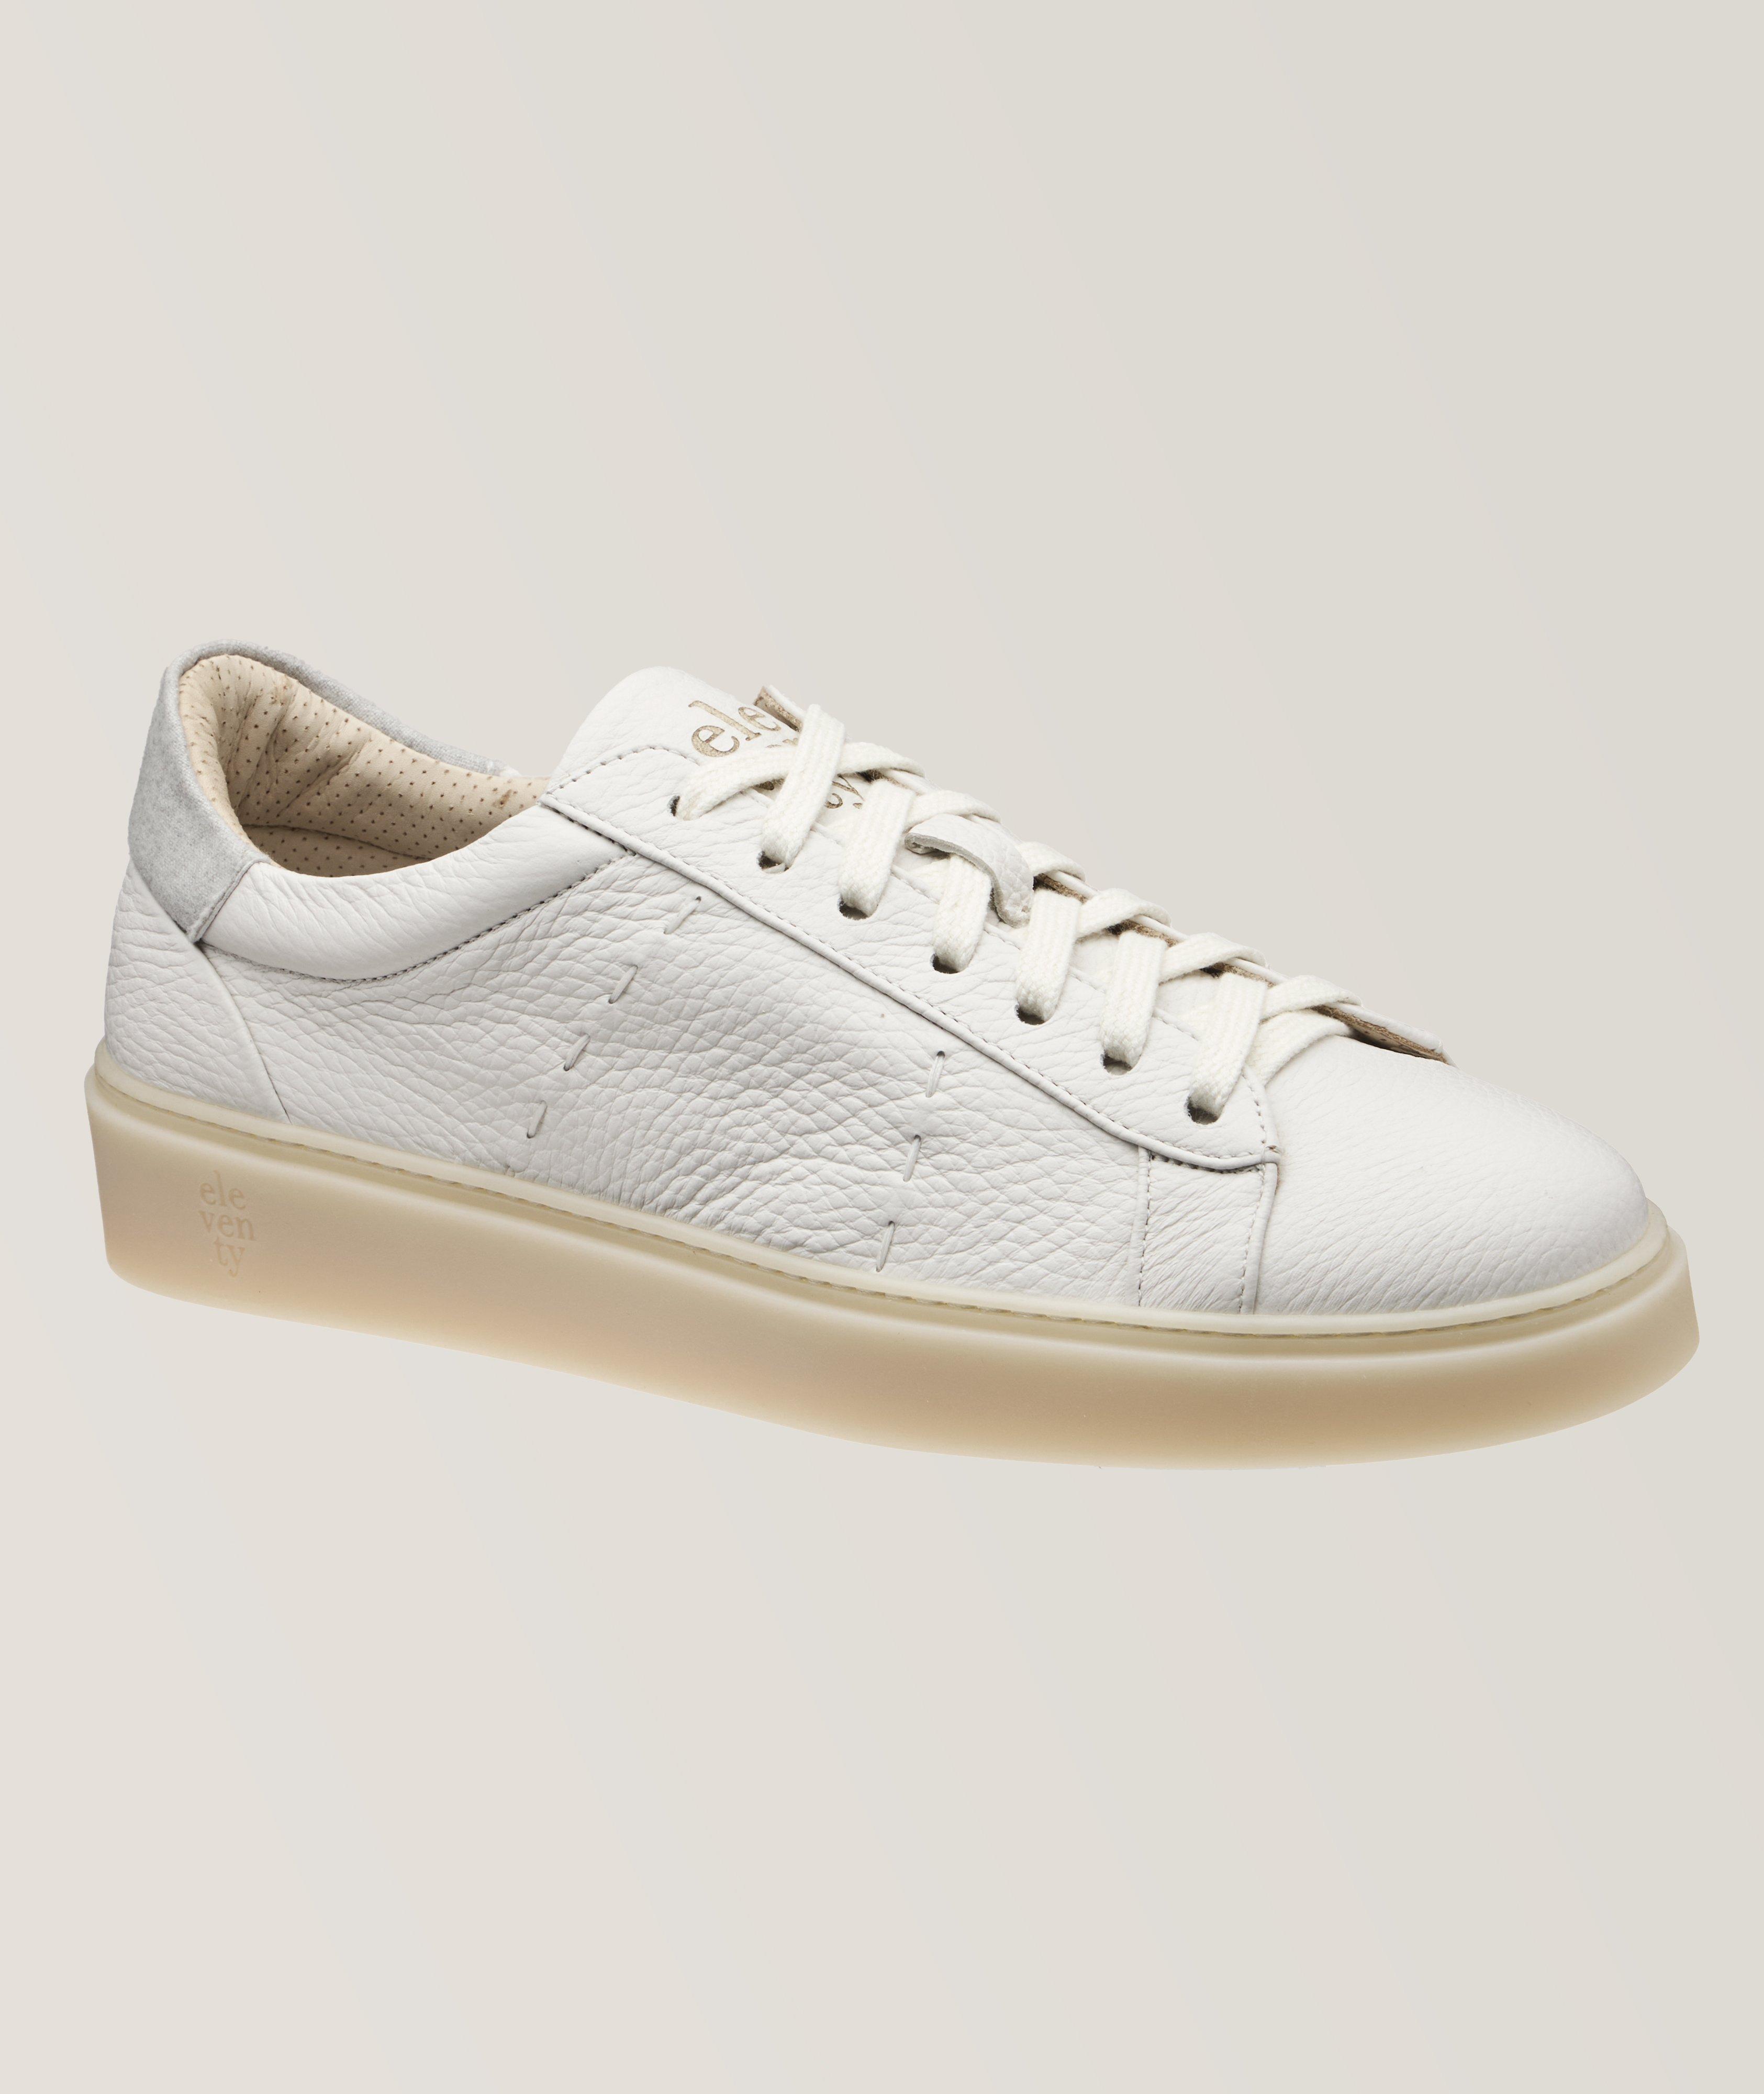 Pick Stitched Leather Sneakers image 0